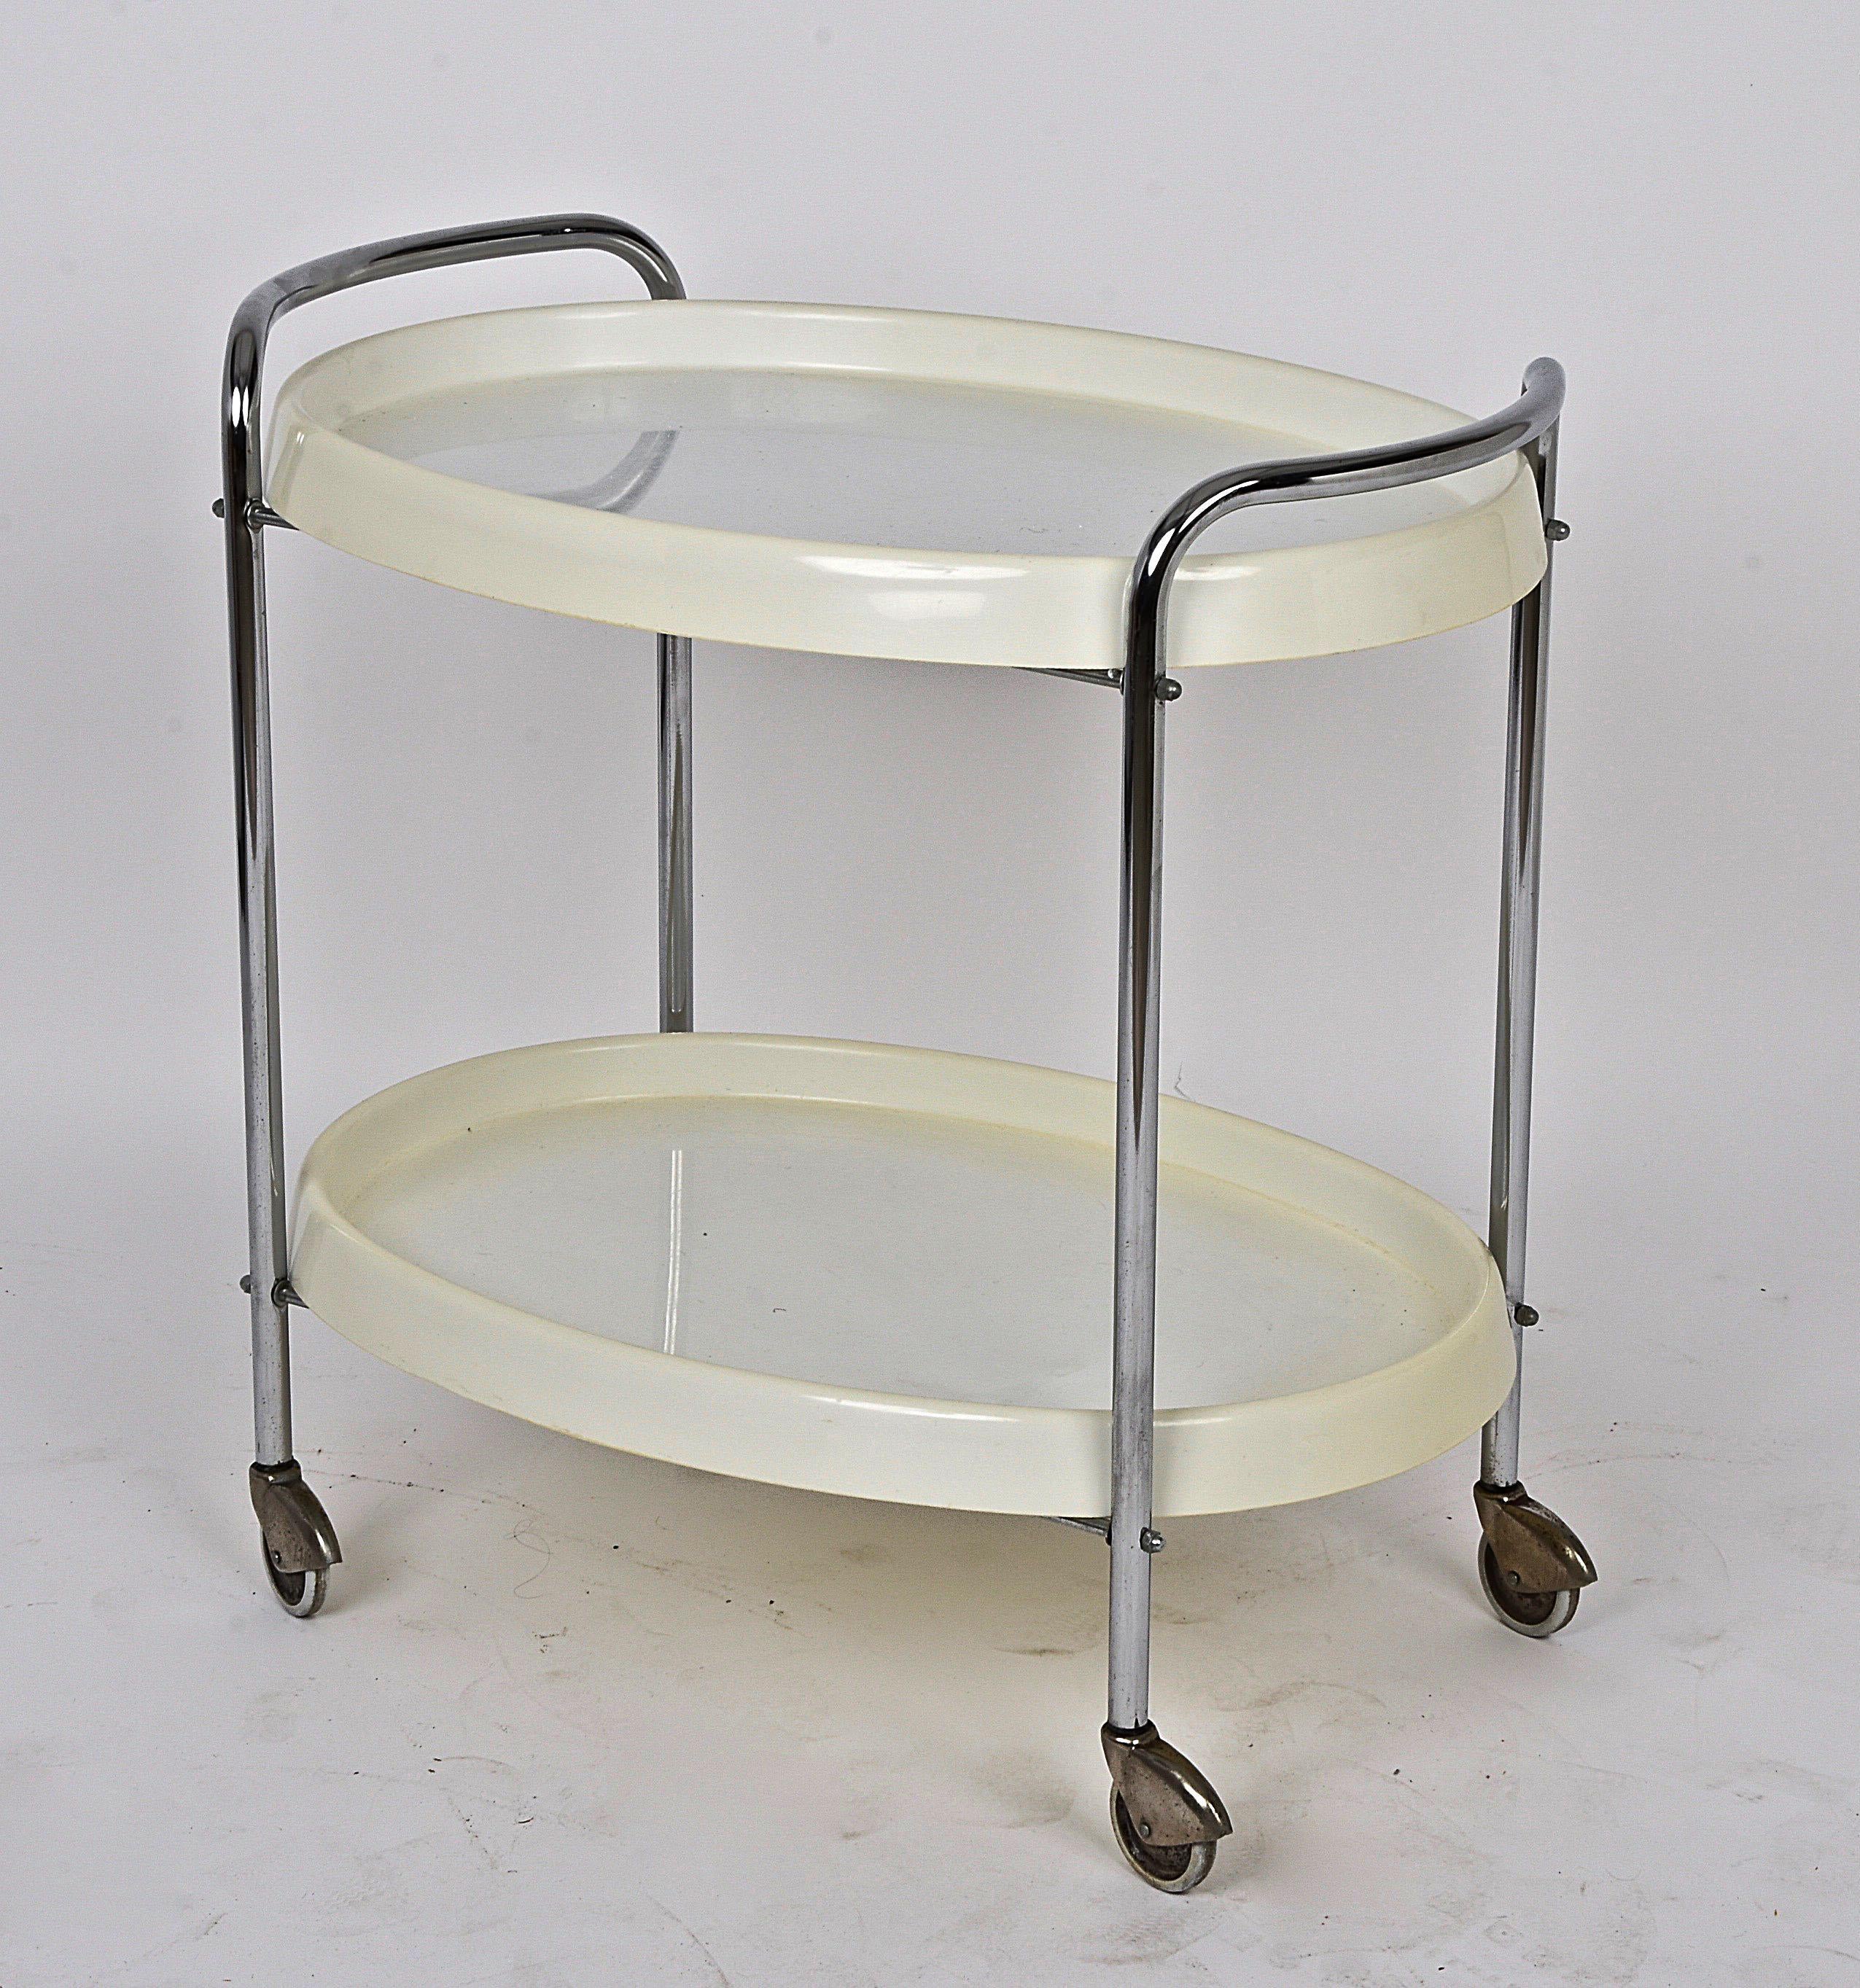 Very rare midcentury bar cart in white plastic and chromed metal. This piece is in very good condition, was designed in Italy during the 1950s.

A wonderful piece that will complete a midcentury kitchen with its round lines and solid